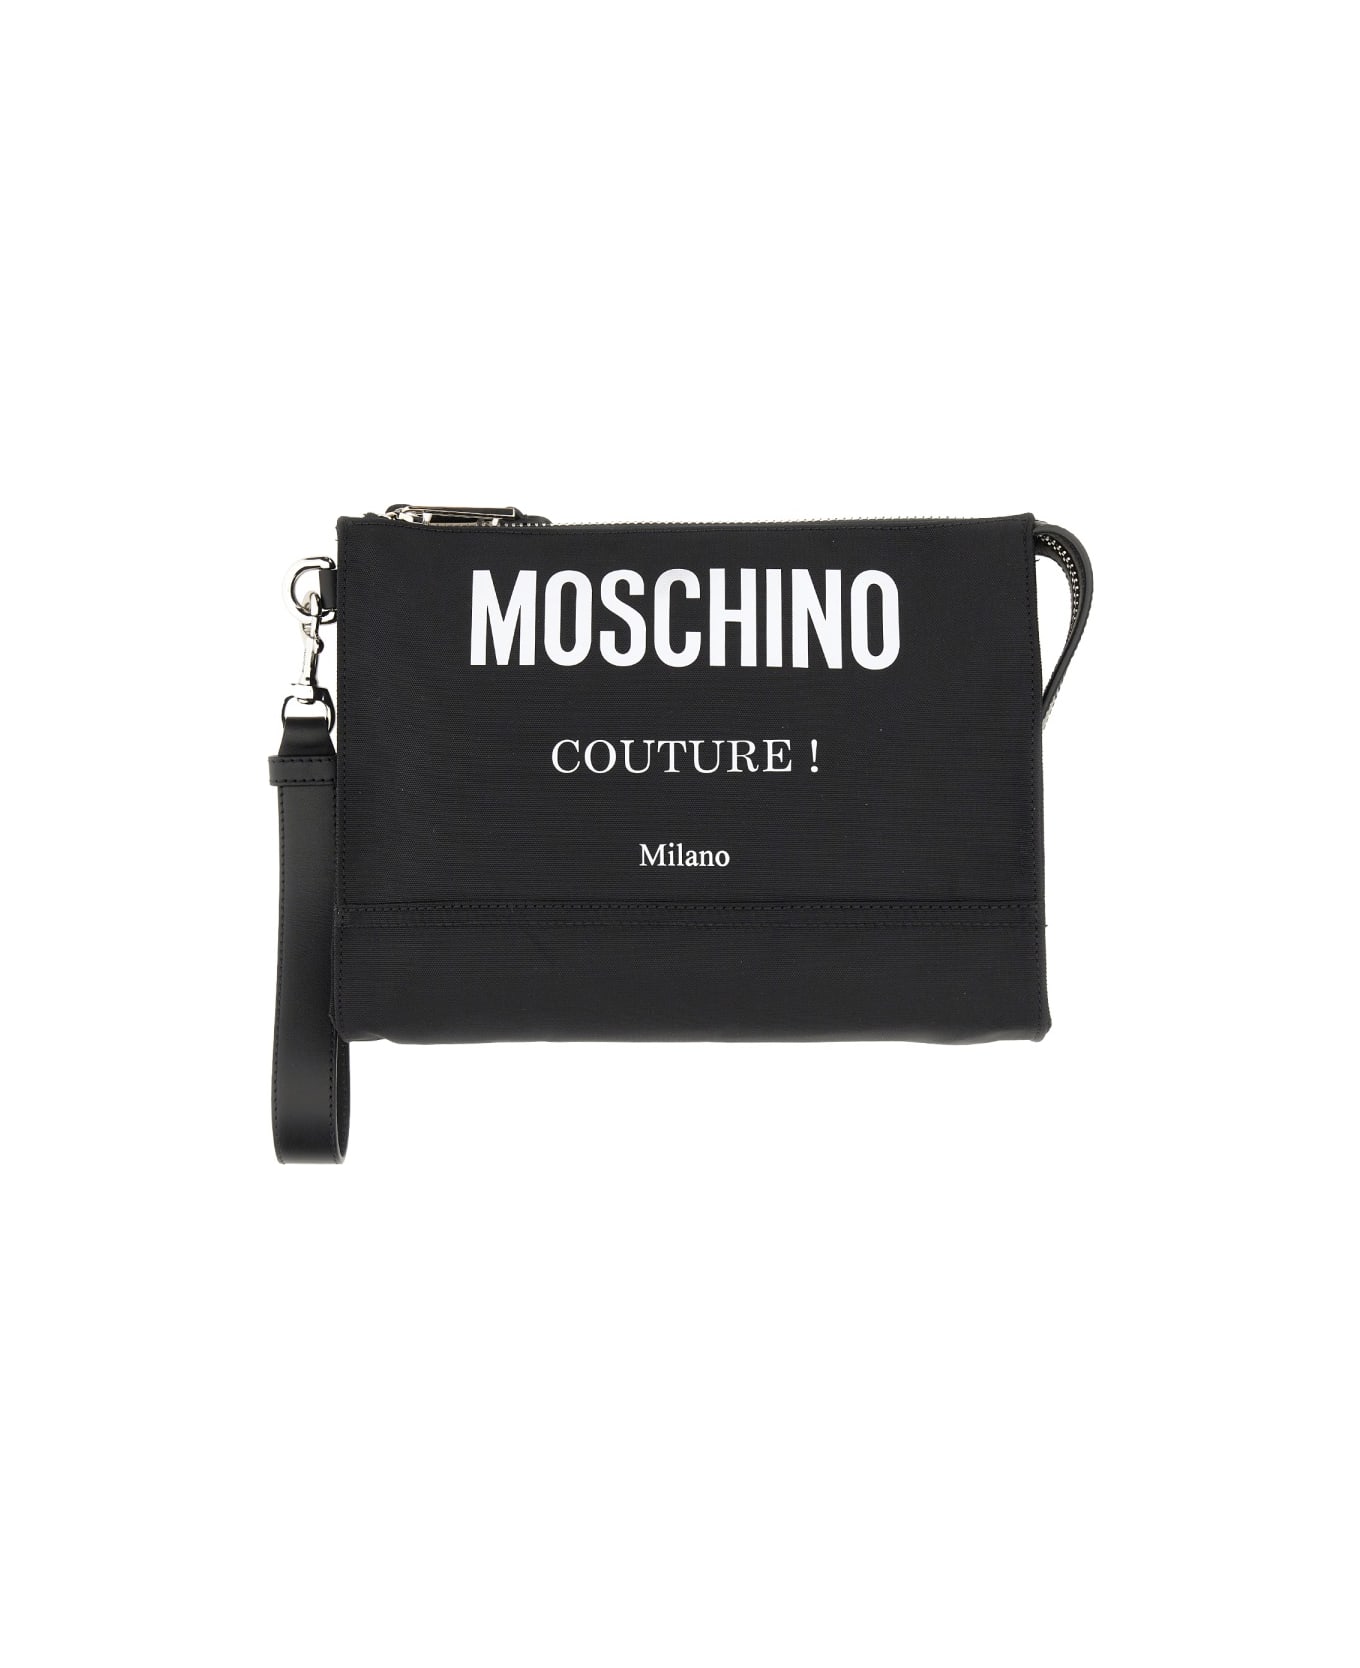 Moschino Clutch Bag With Logo - BLACK ショルダーバッグ